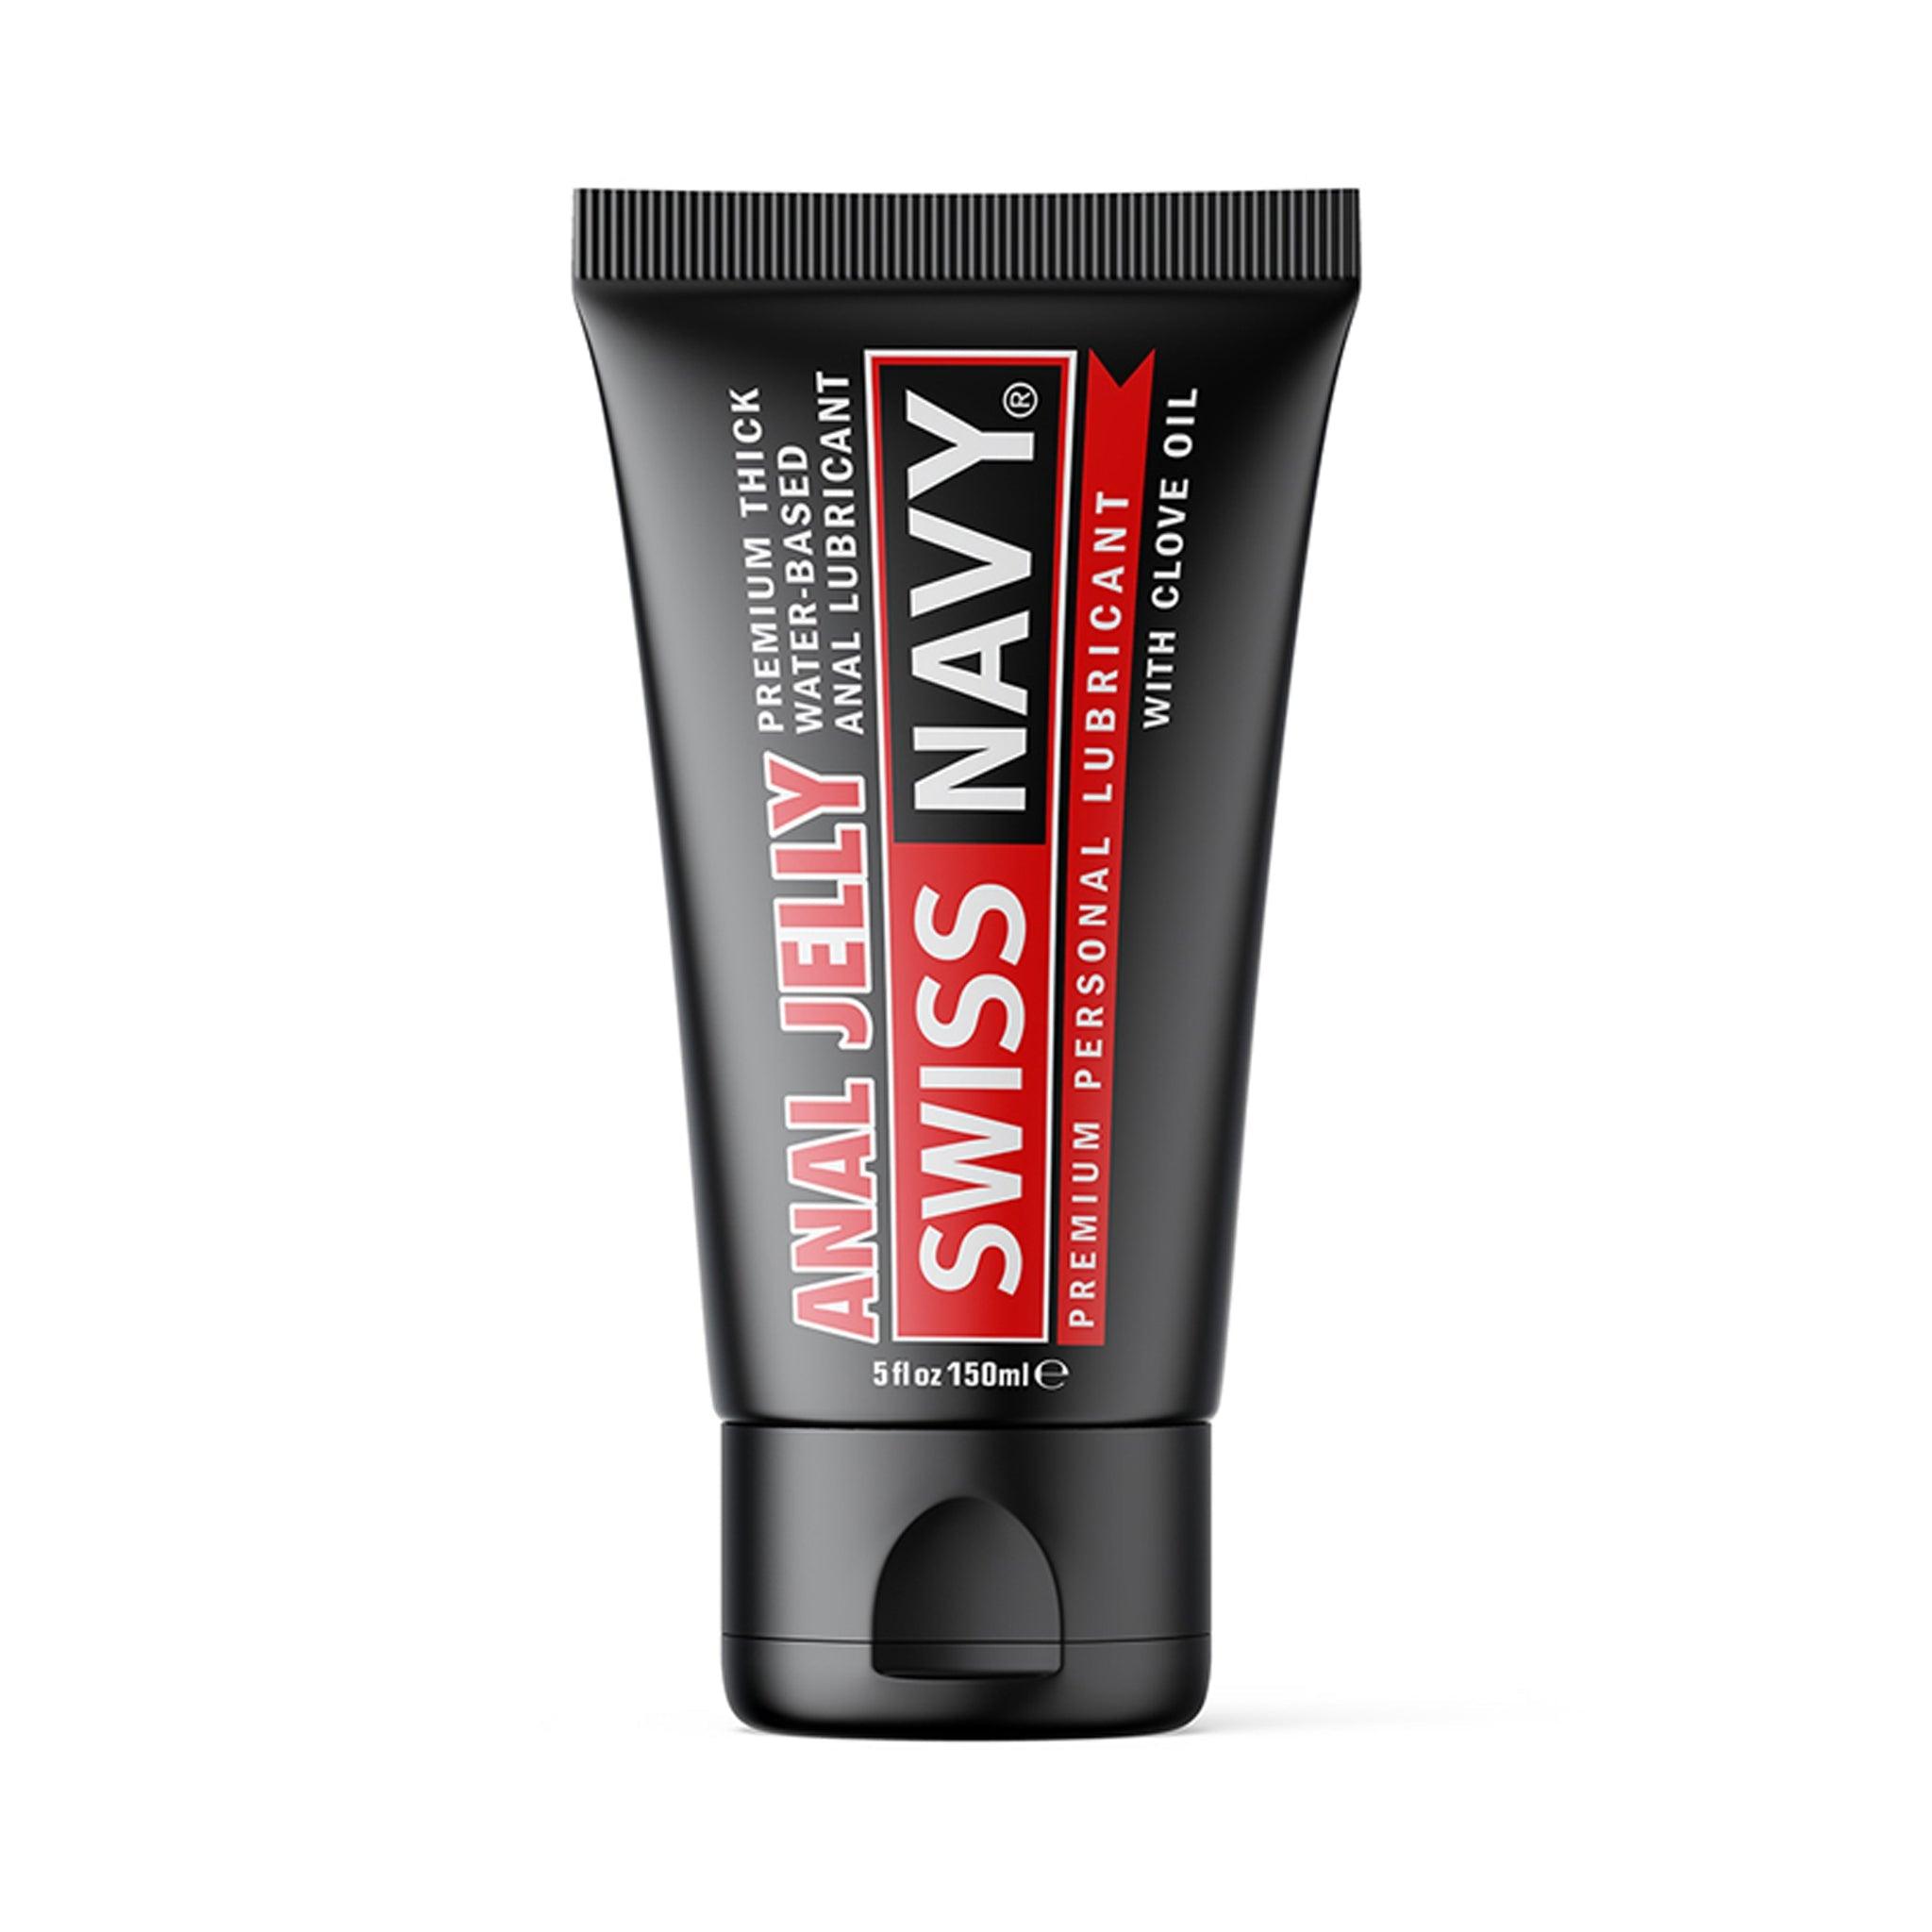 Swiss Navy Anal Jelly - Premium Thick Water-Based Anal Lubricant 5 oz (150 mL) - CheapLubes.com